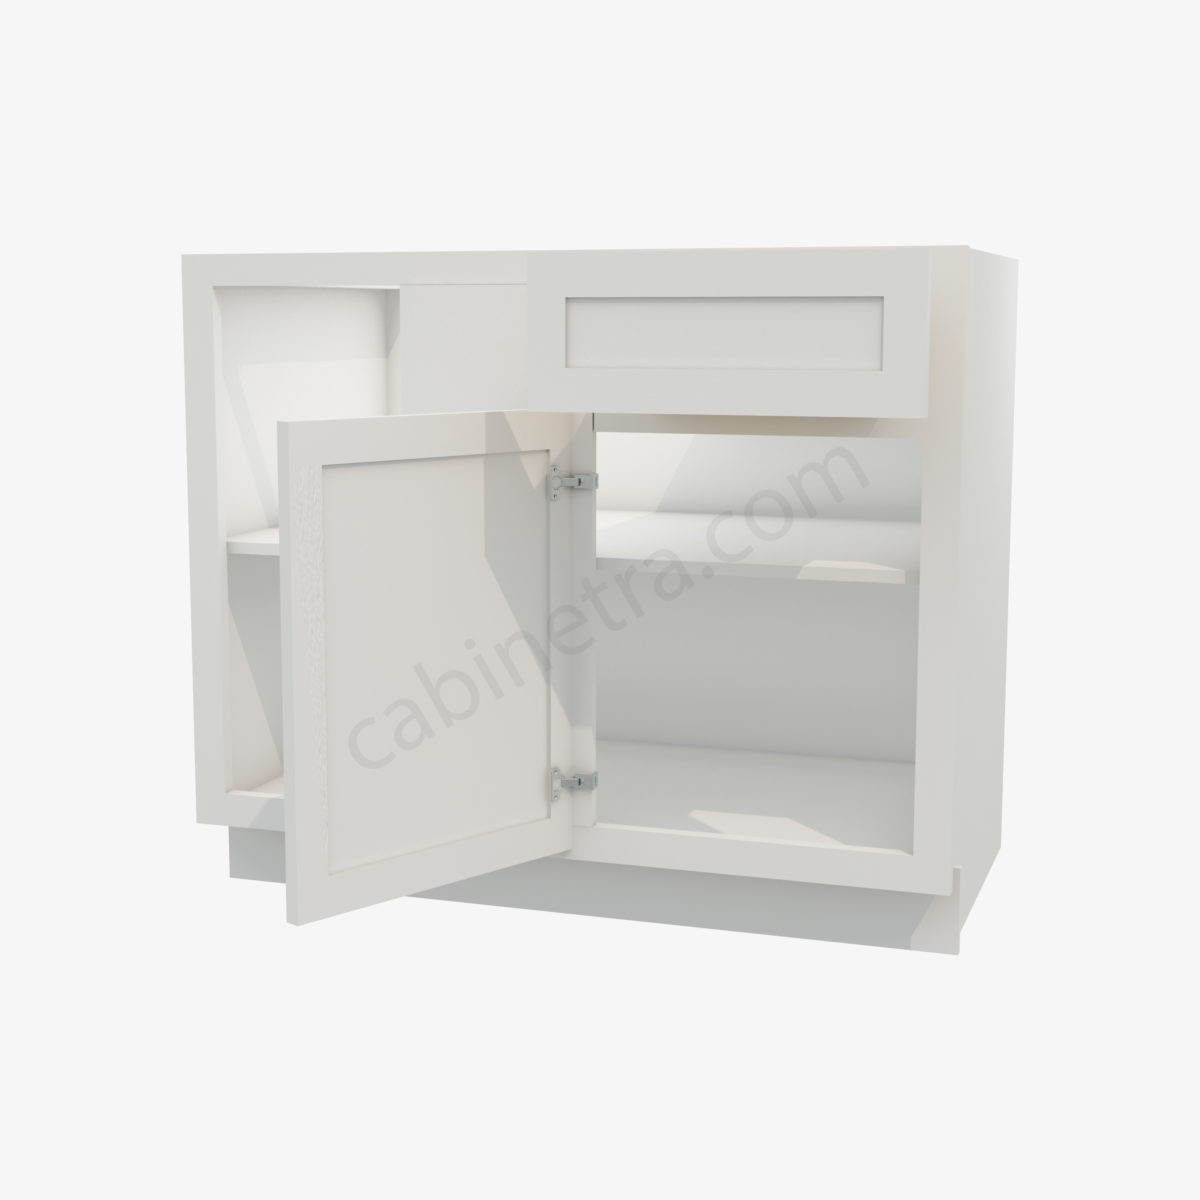 AW BBLC42 45 39W 5 Forevermark Ice White Shaker Cabinetra scaled